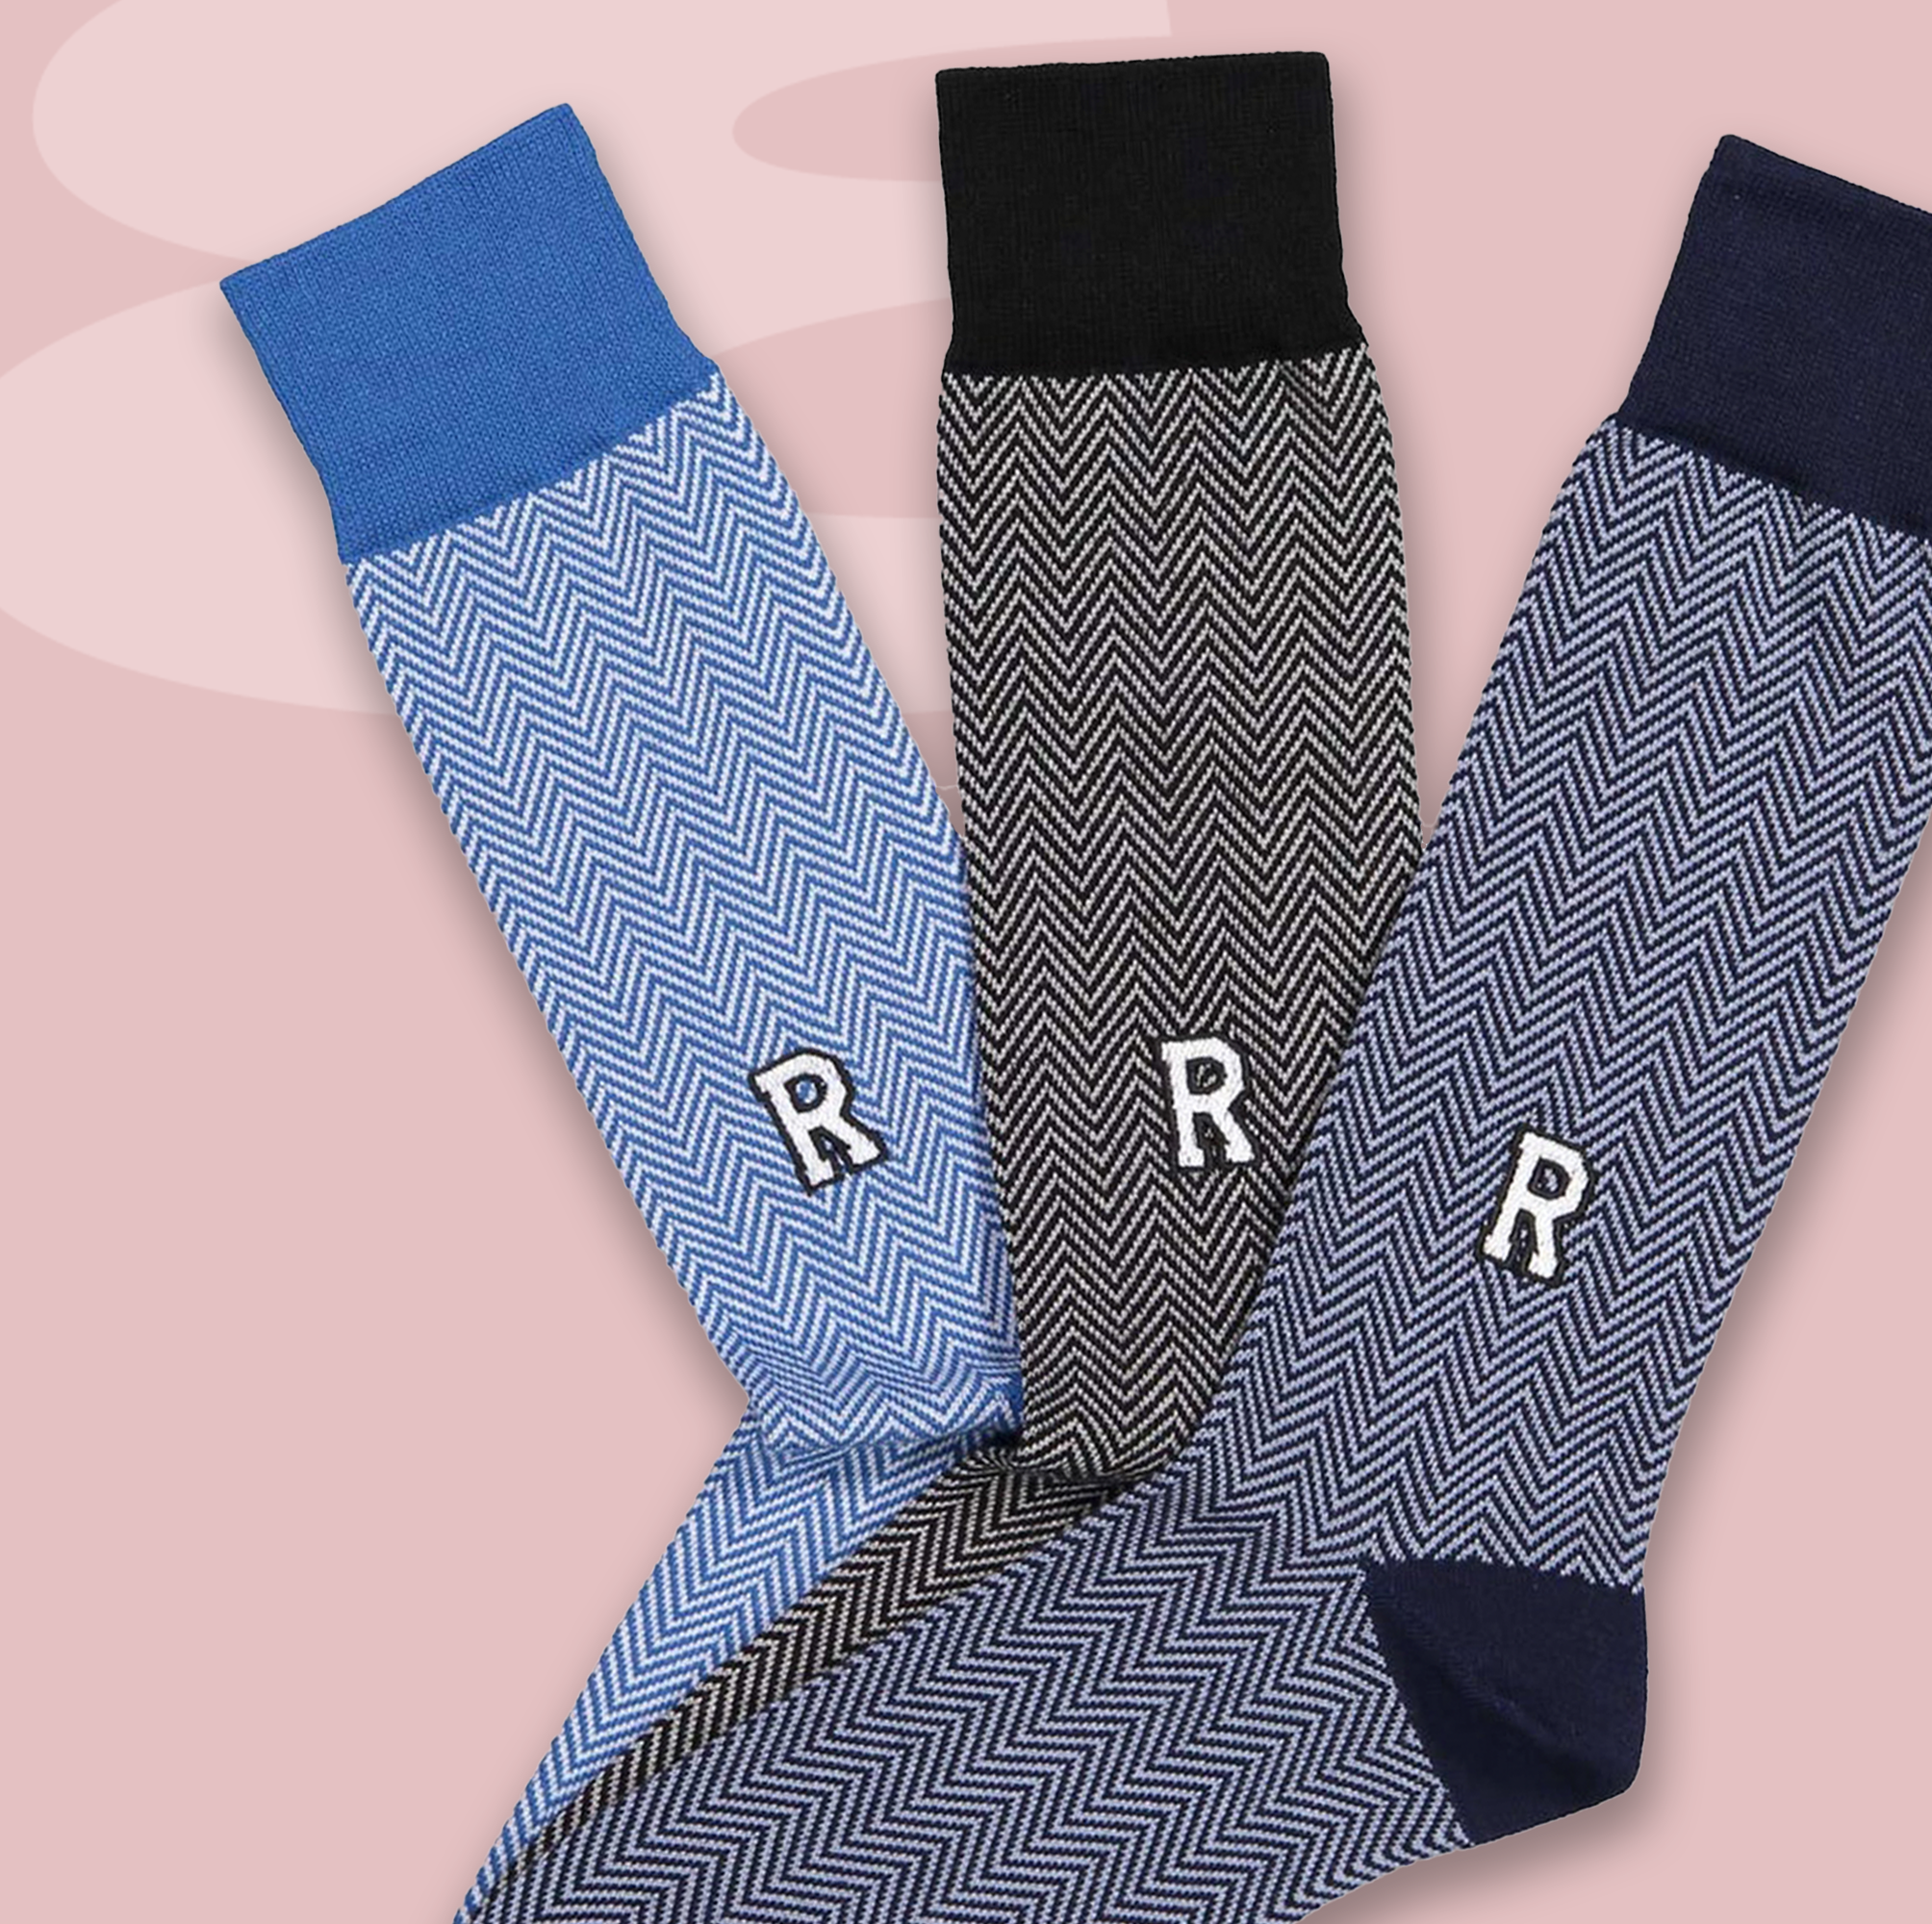 The 20 Best Socks to Add to Your Regular Rotation